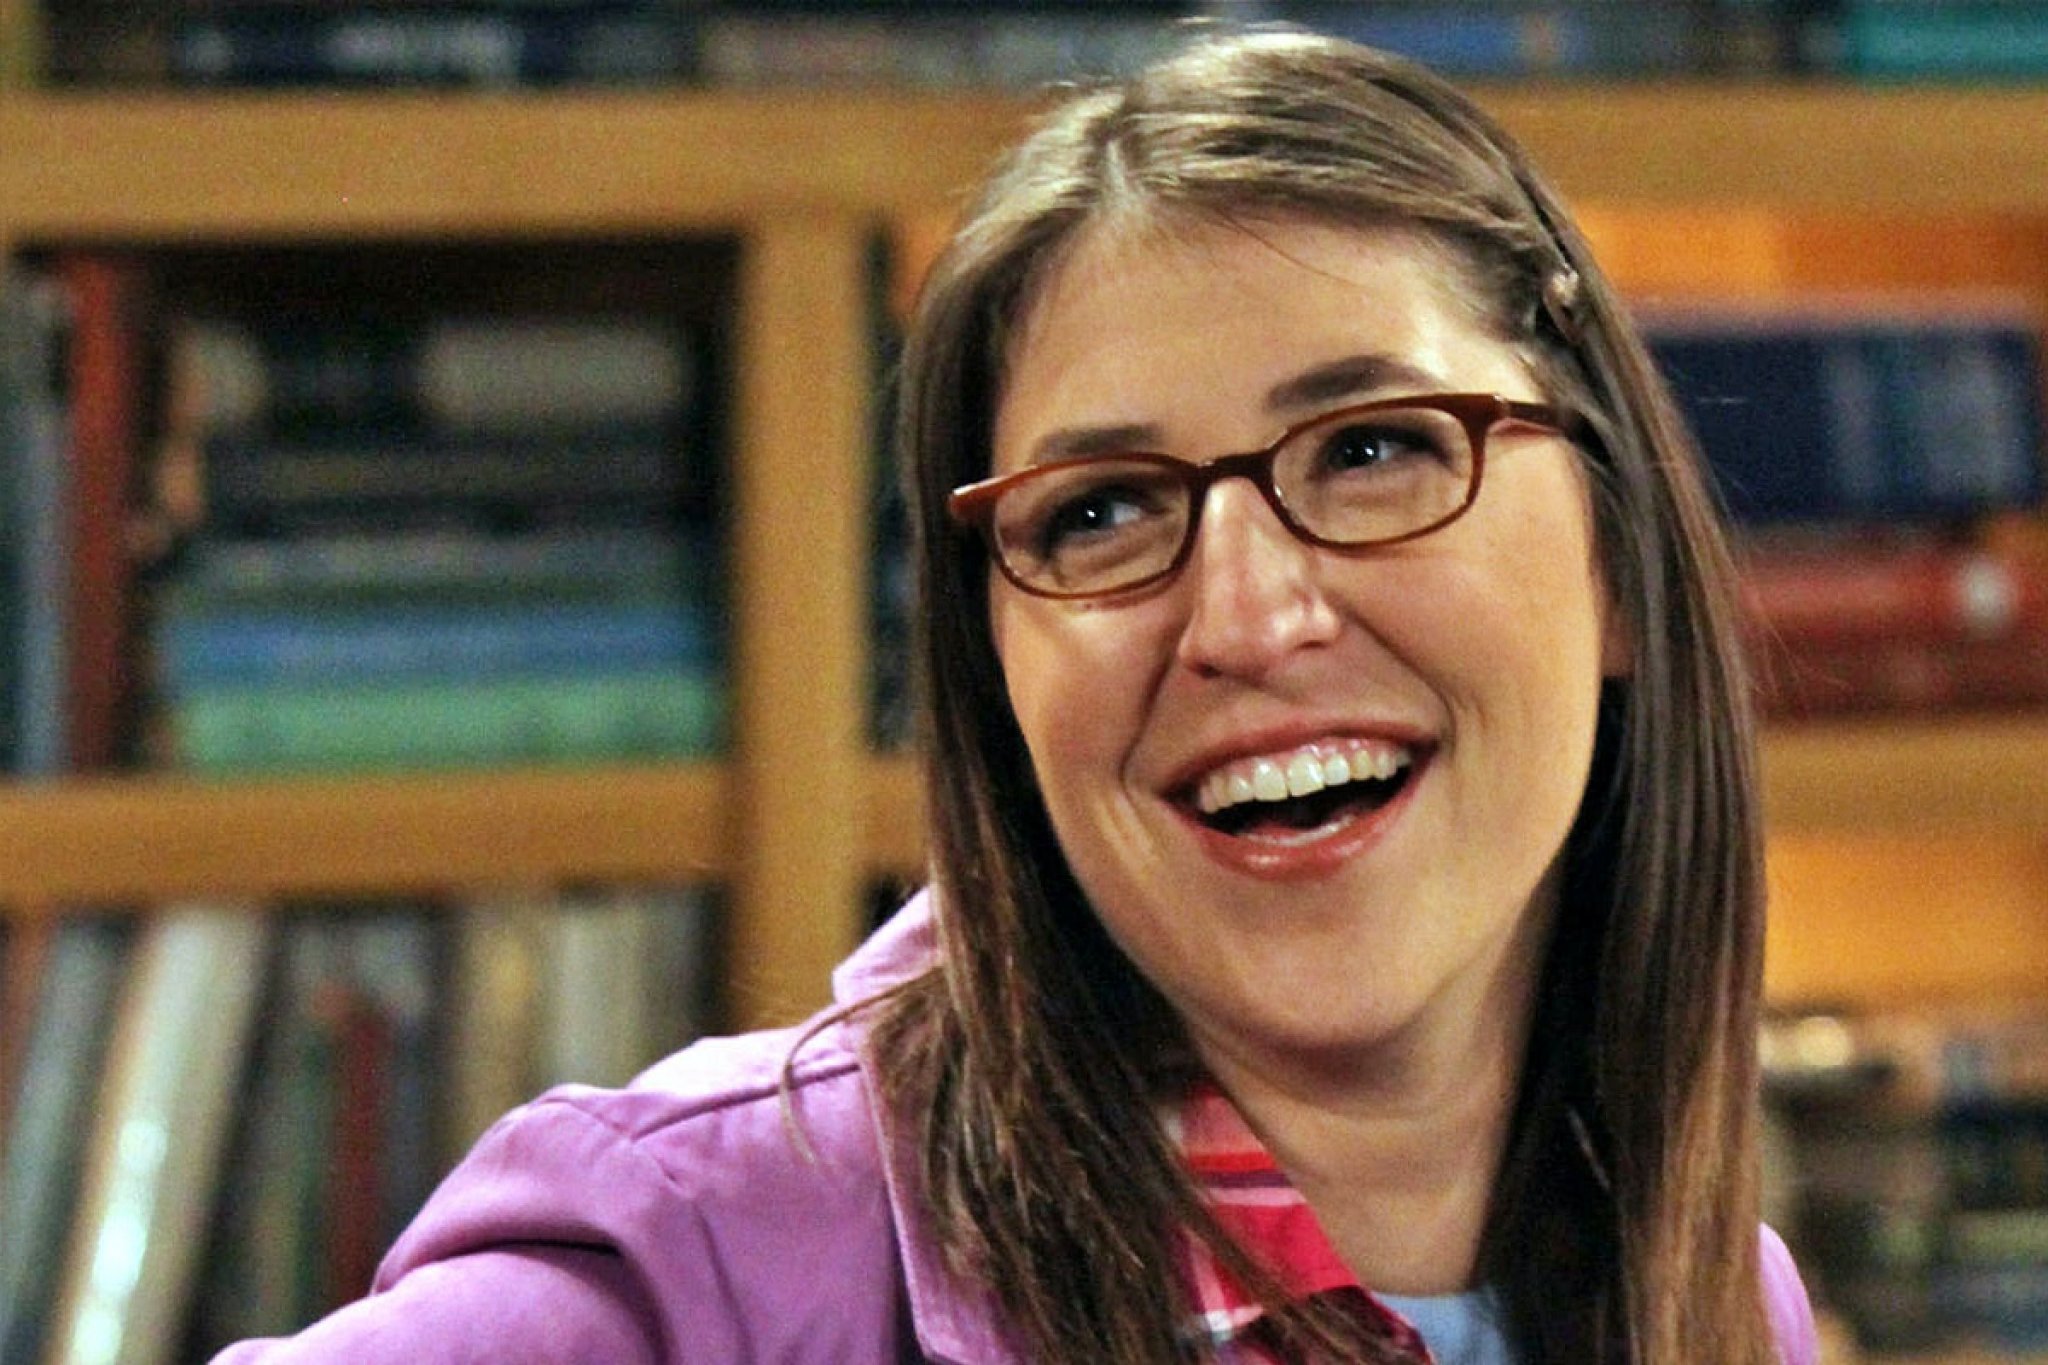 August 2021: Mayim Bialik Being Cancelled As Jeopardy! Host For Multiple Controversies